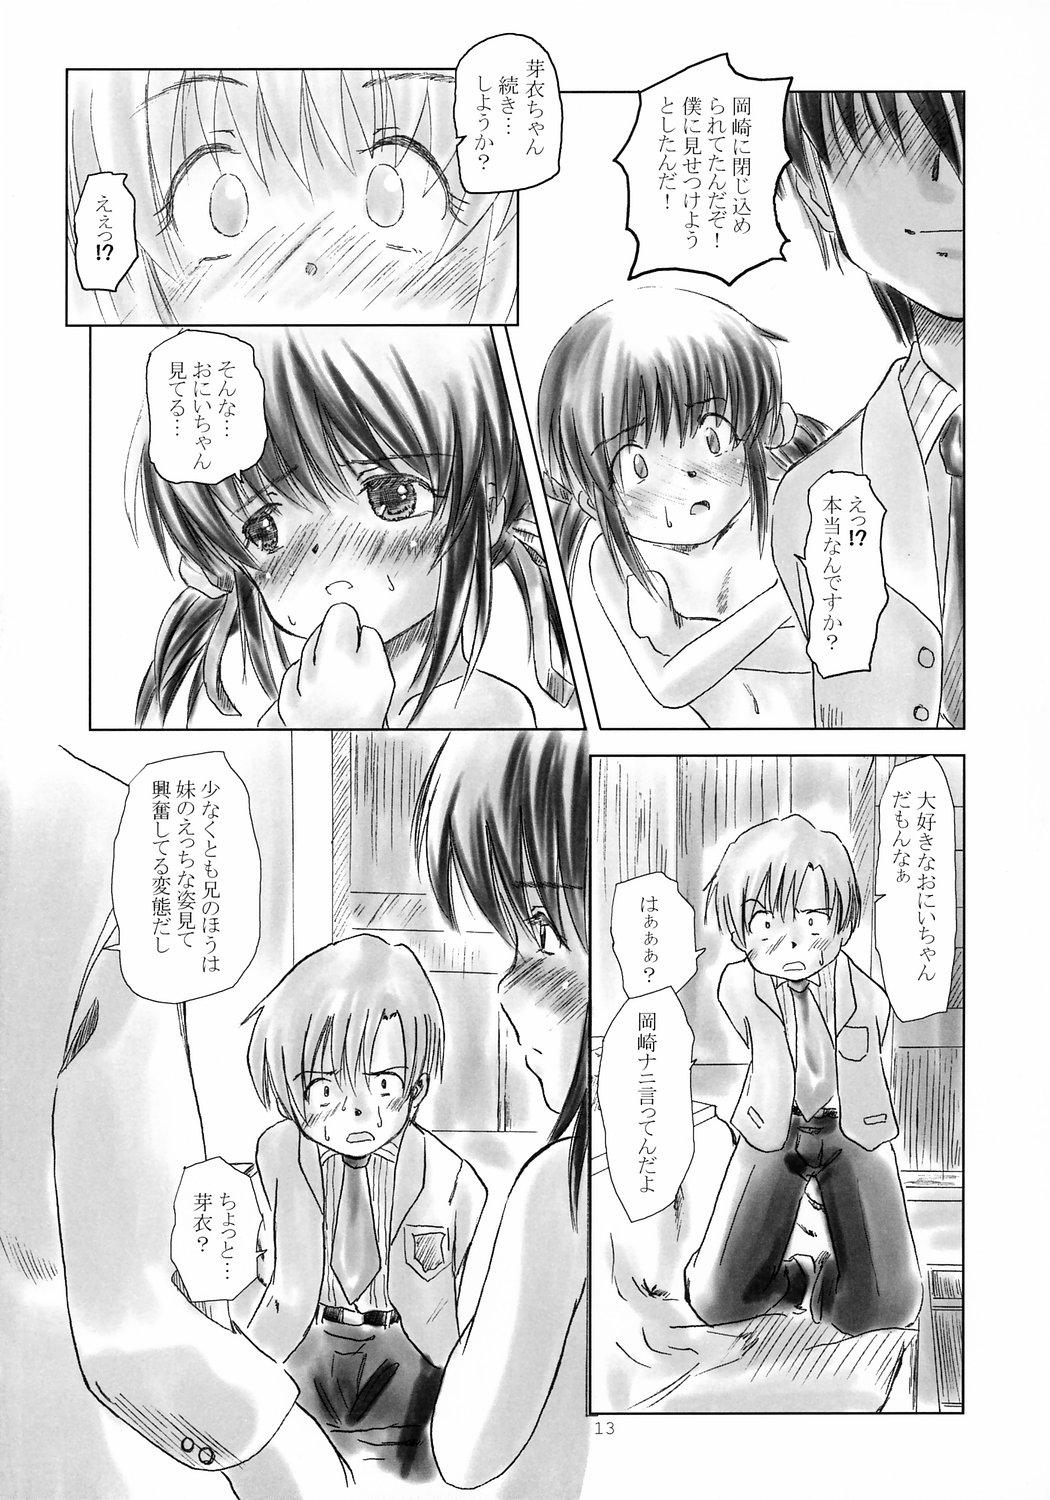 Fat Ass May it be!! - Clannad Village - Page 12